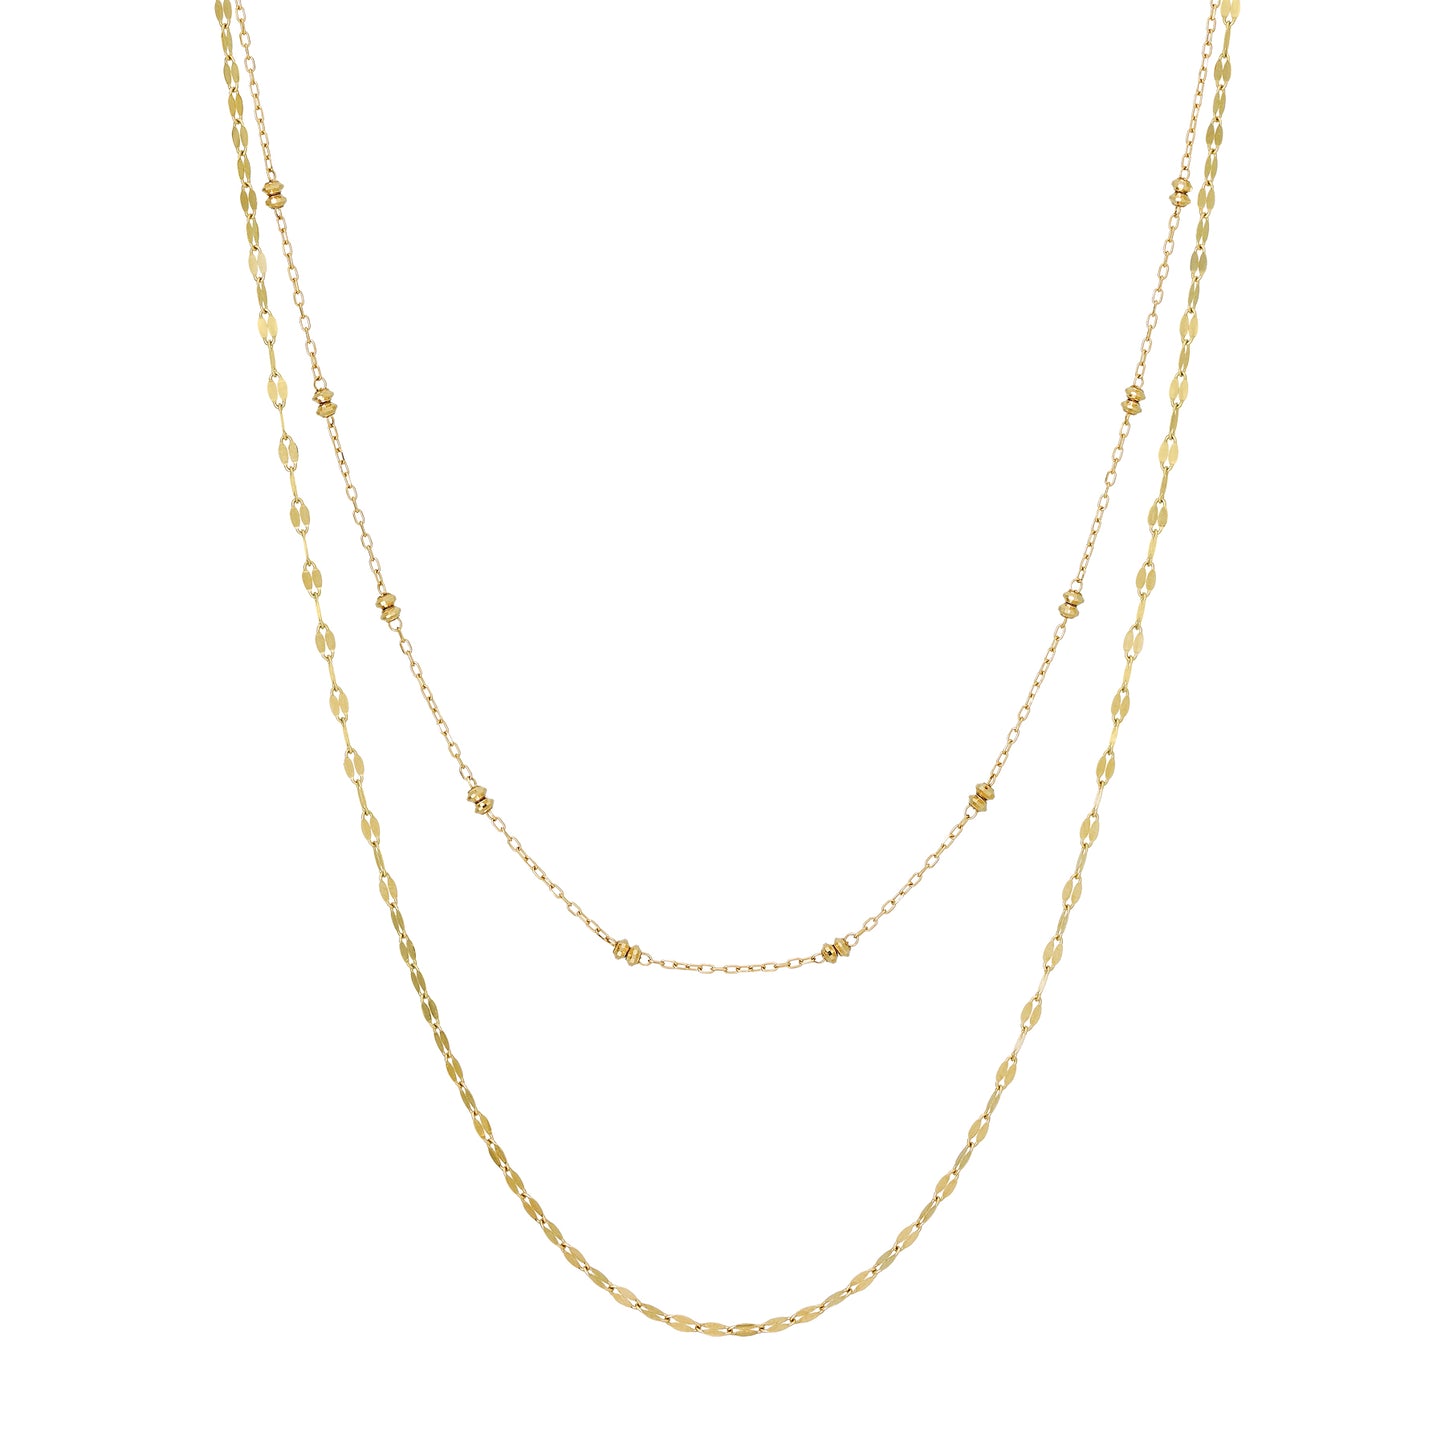 10K Yellow Gold Double Glittering Long Necklace - Product Image